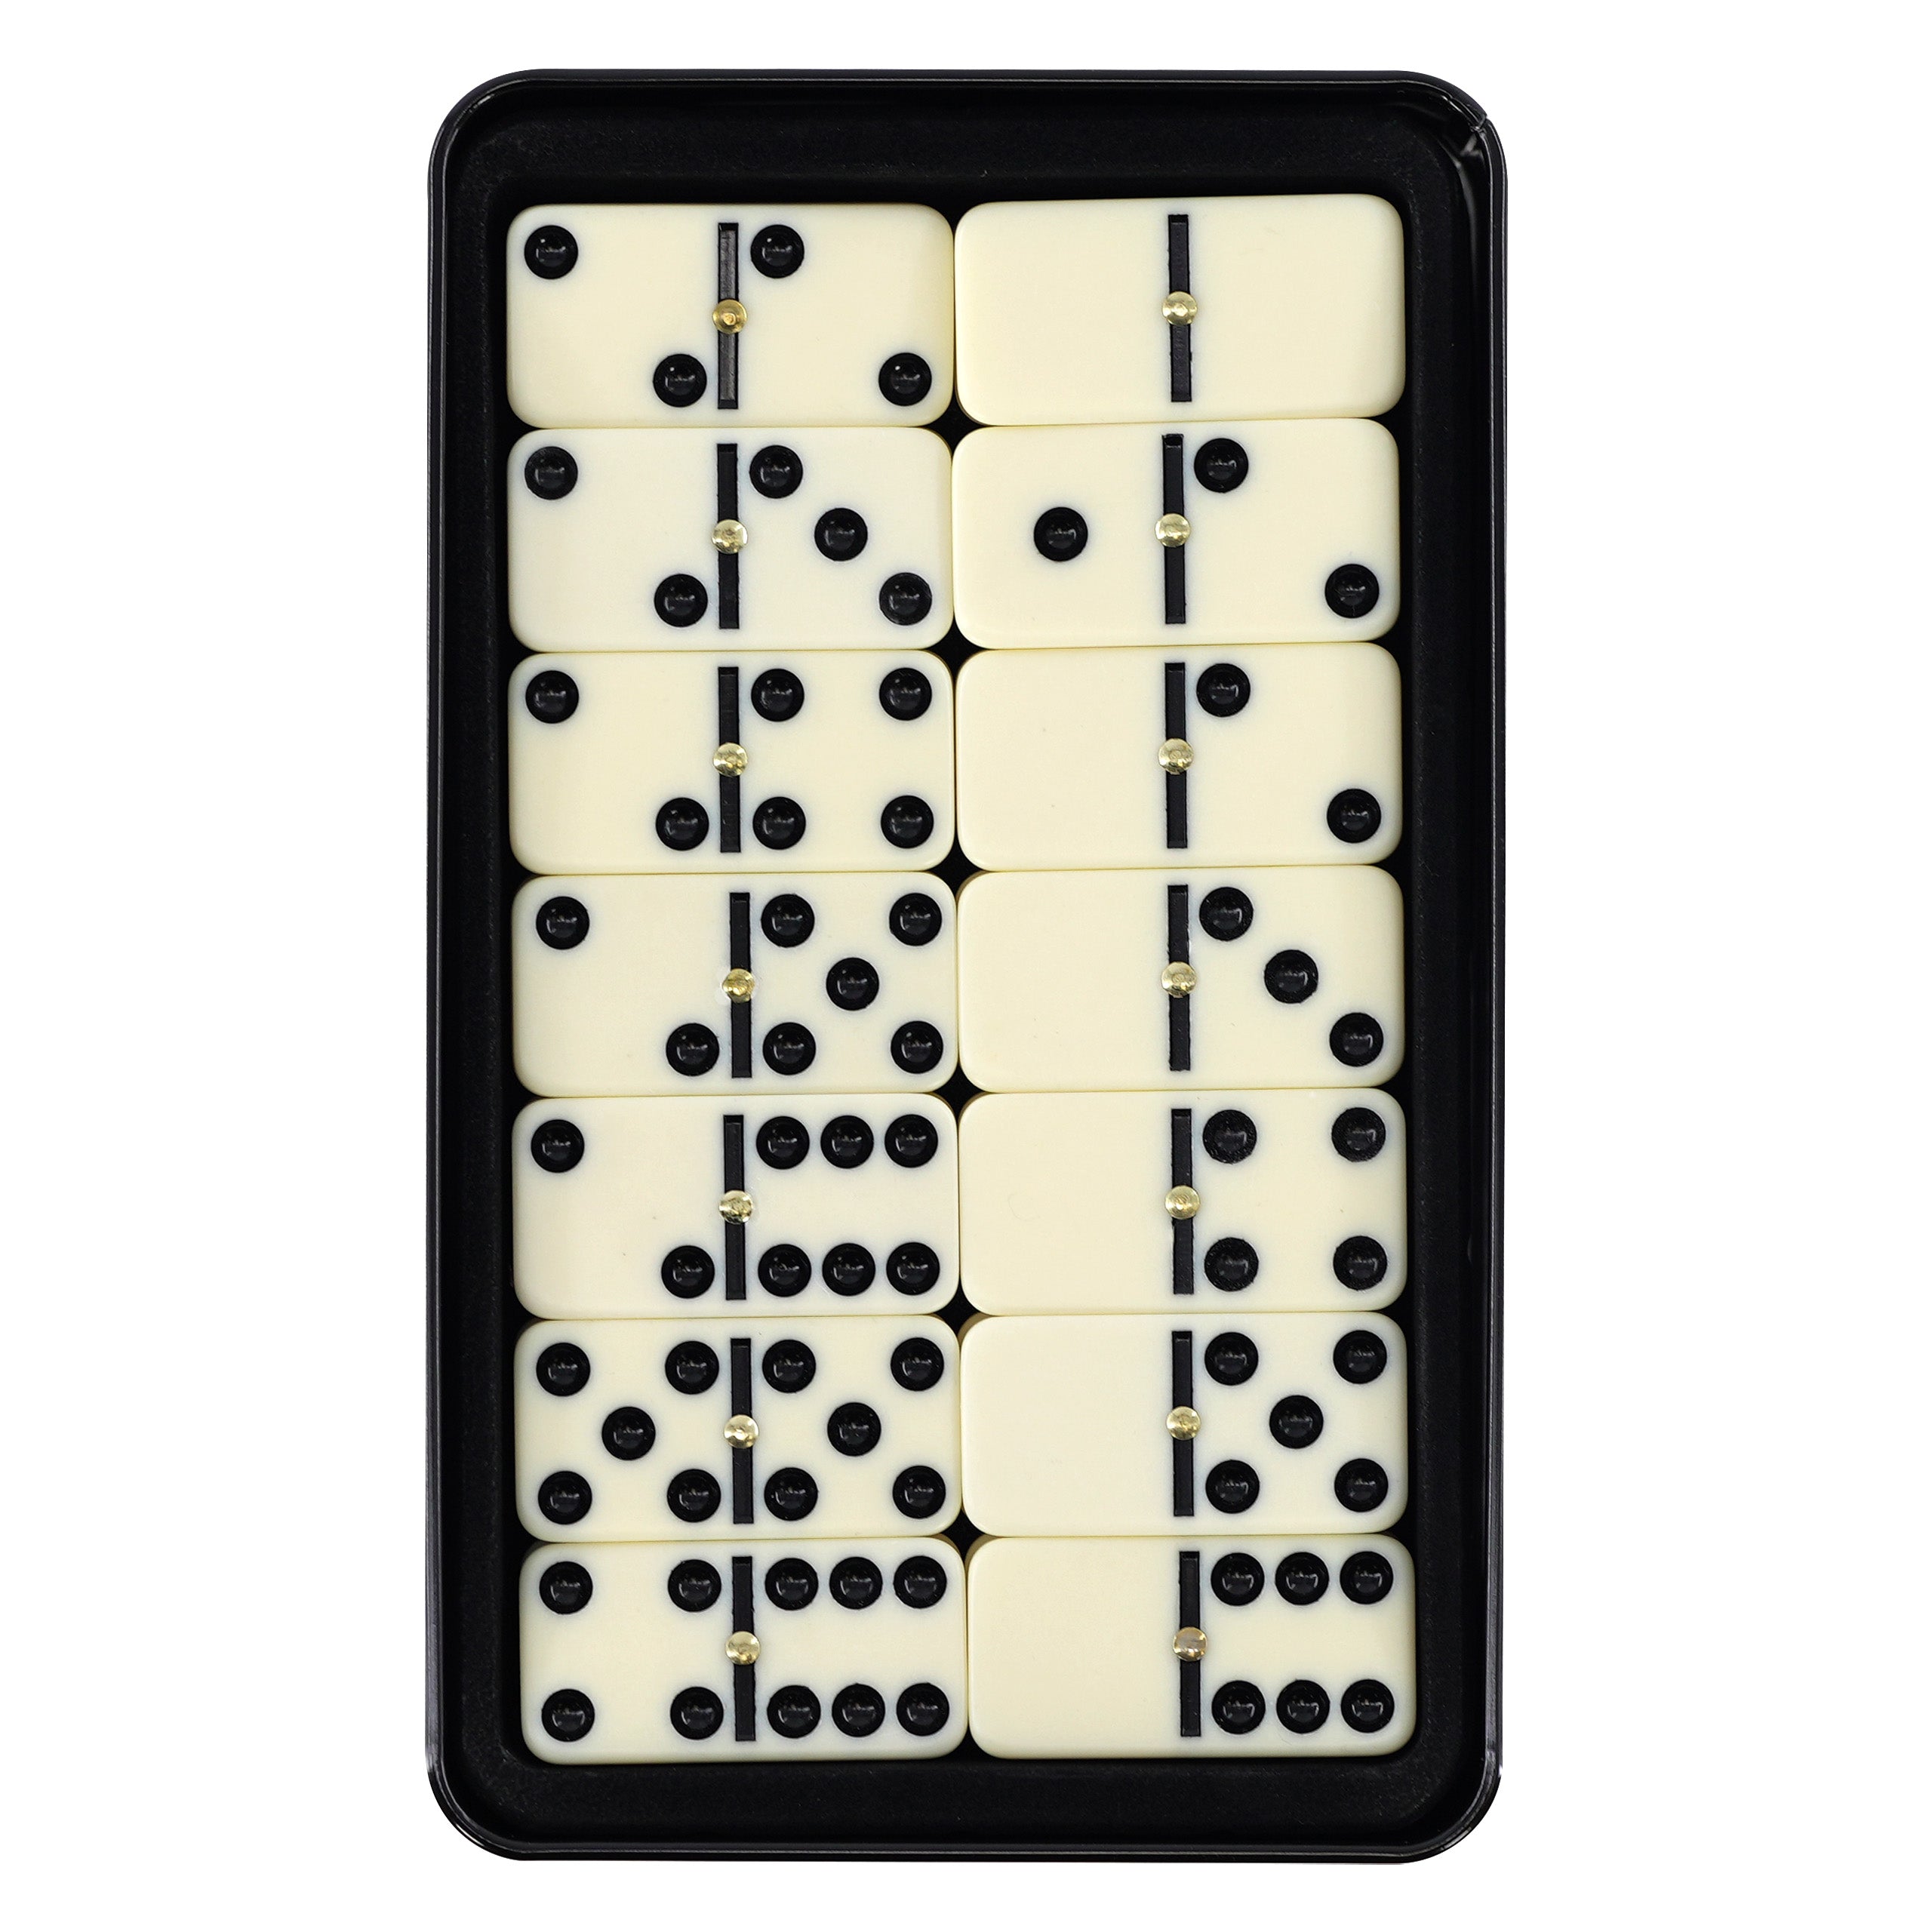 Double Six Classic Dominoes Set The Magic Toy Shop - The Magic Toy Shop